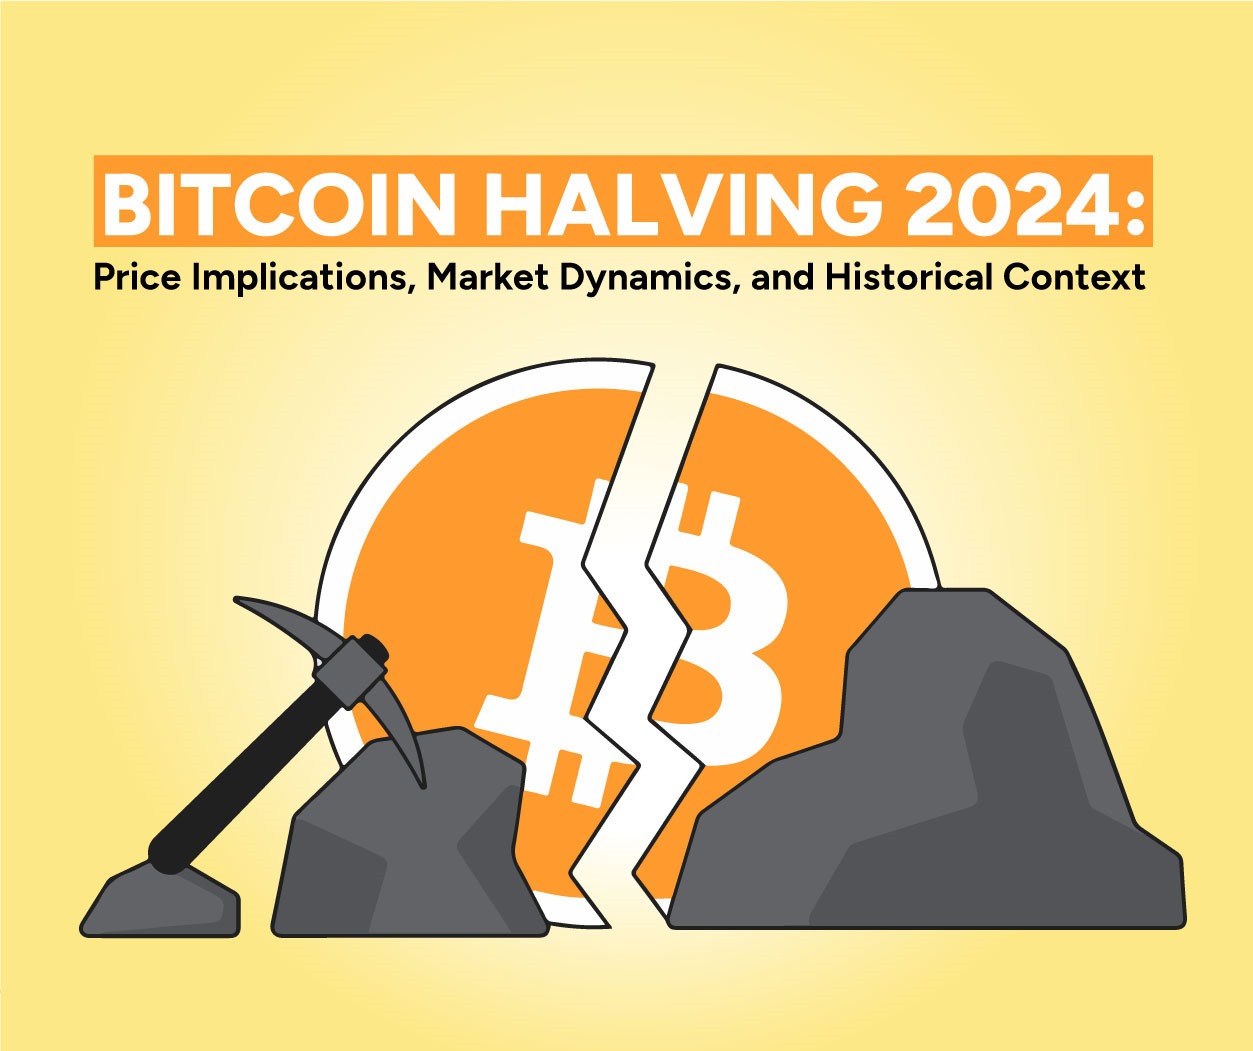 Bitcoin Halving 2024: Price Implications, Market Dynamics, and Historical Context